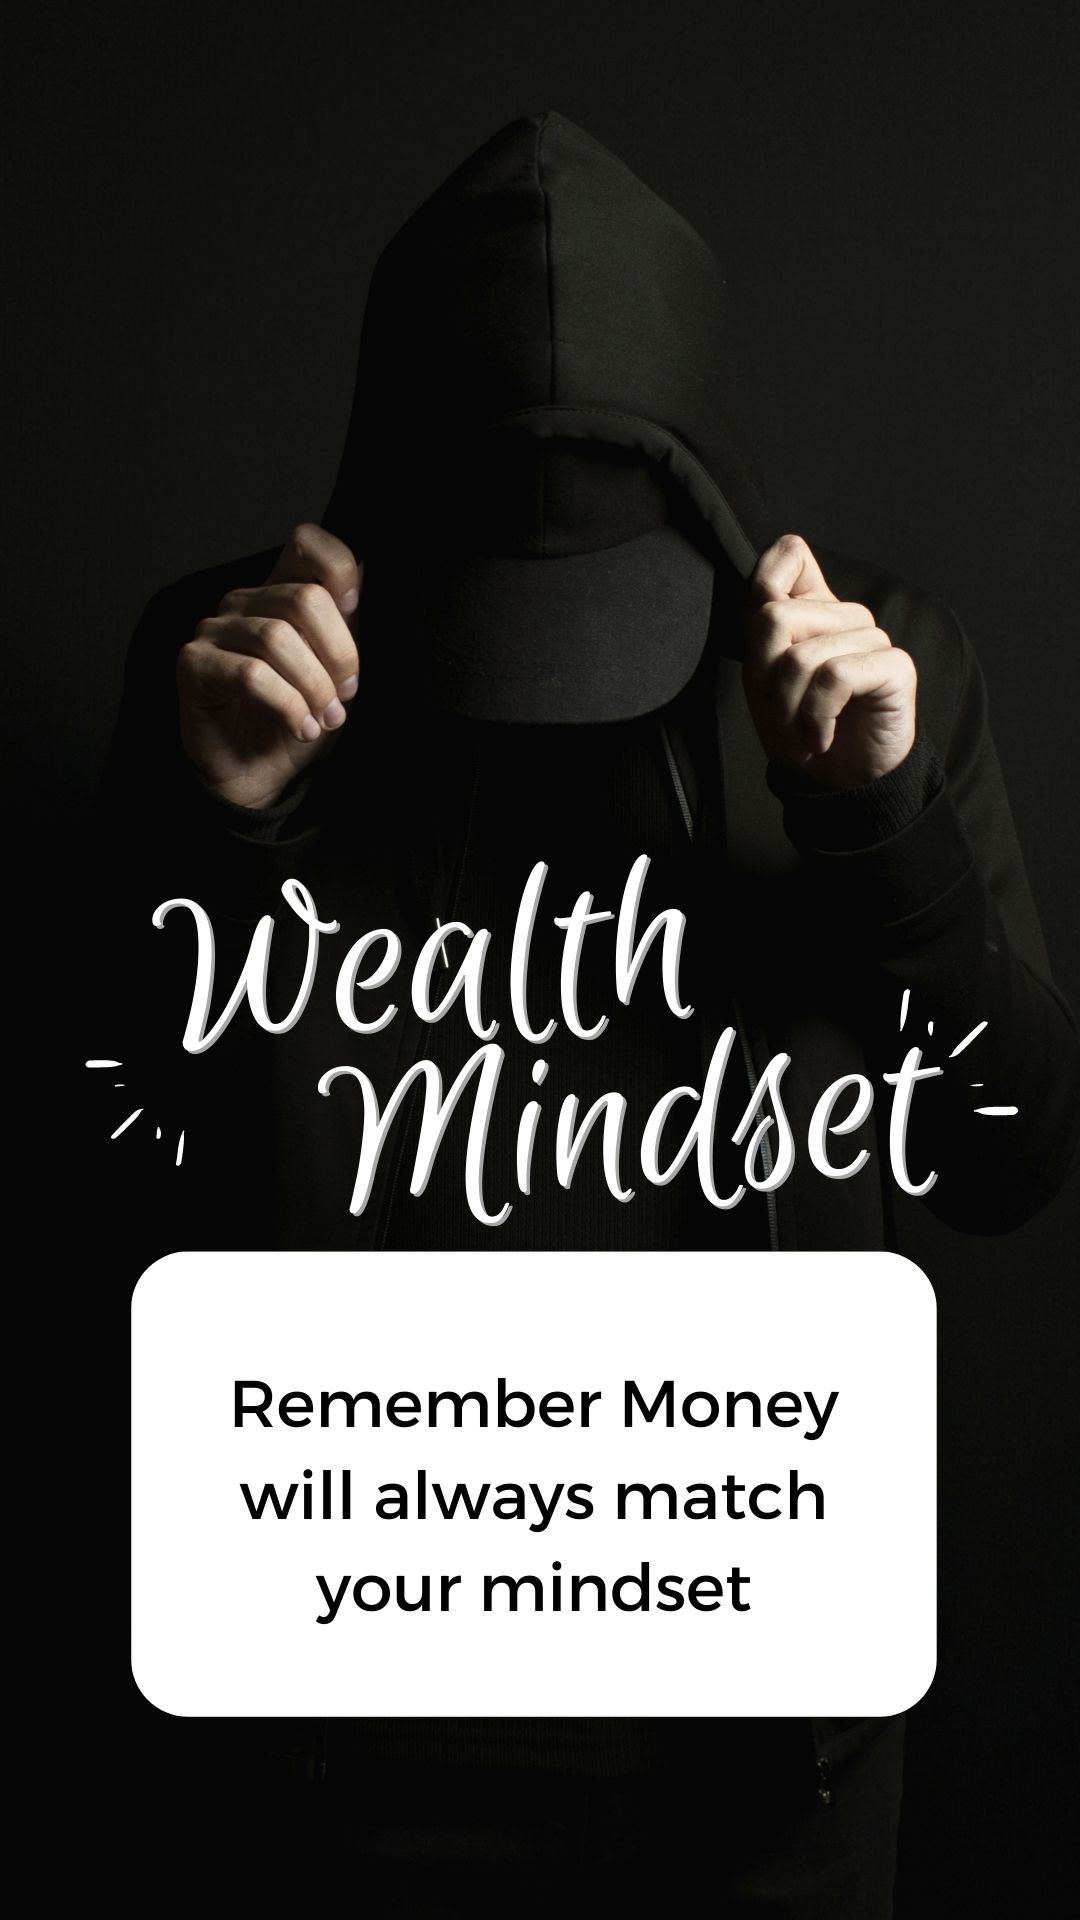 Remember Money will always match your mindset